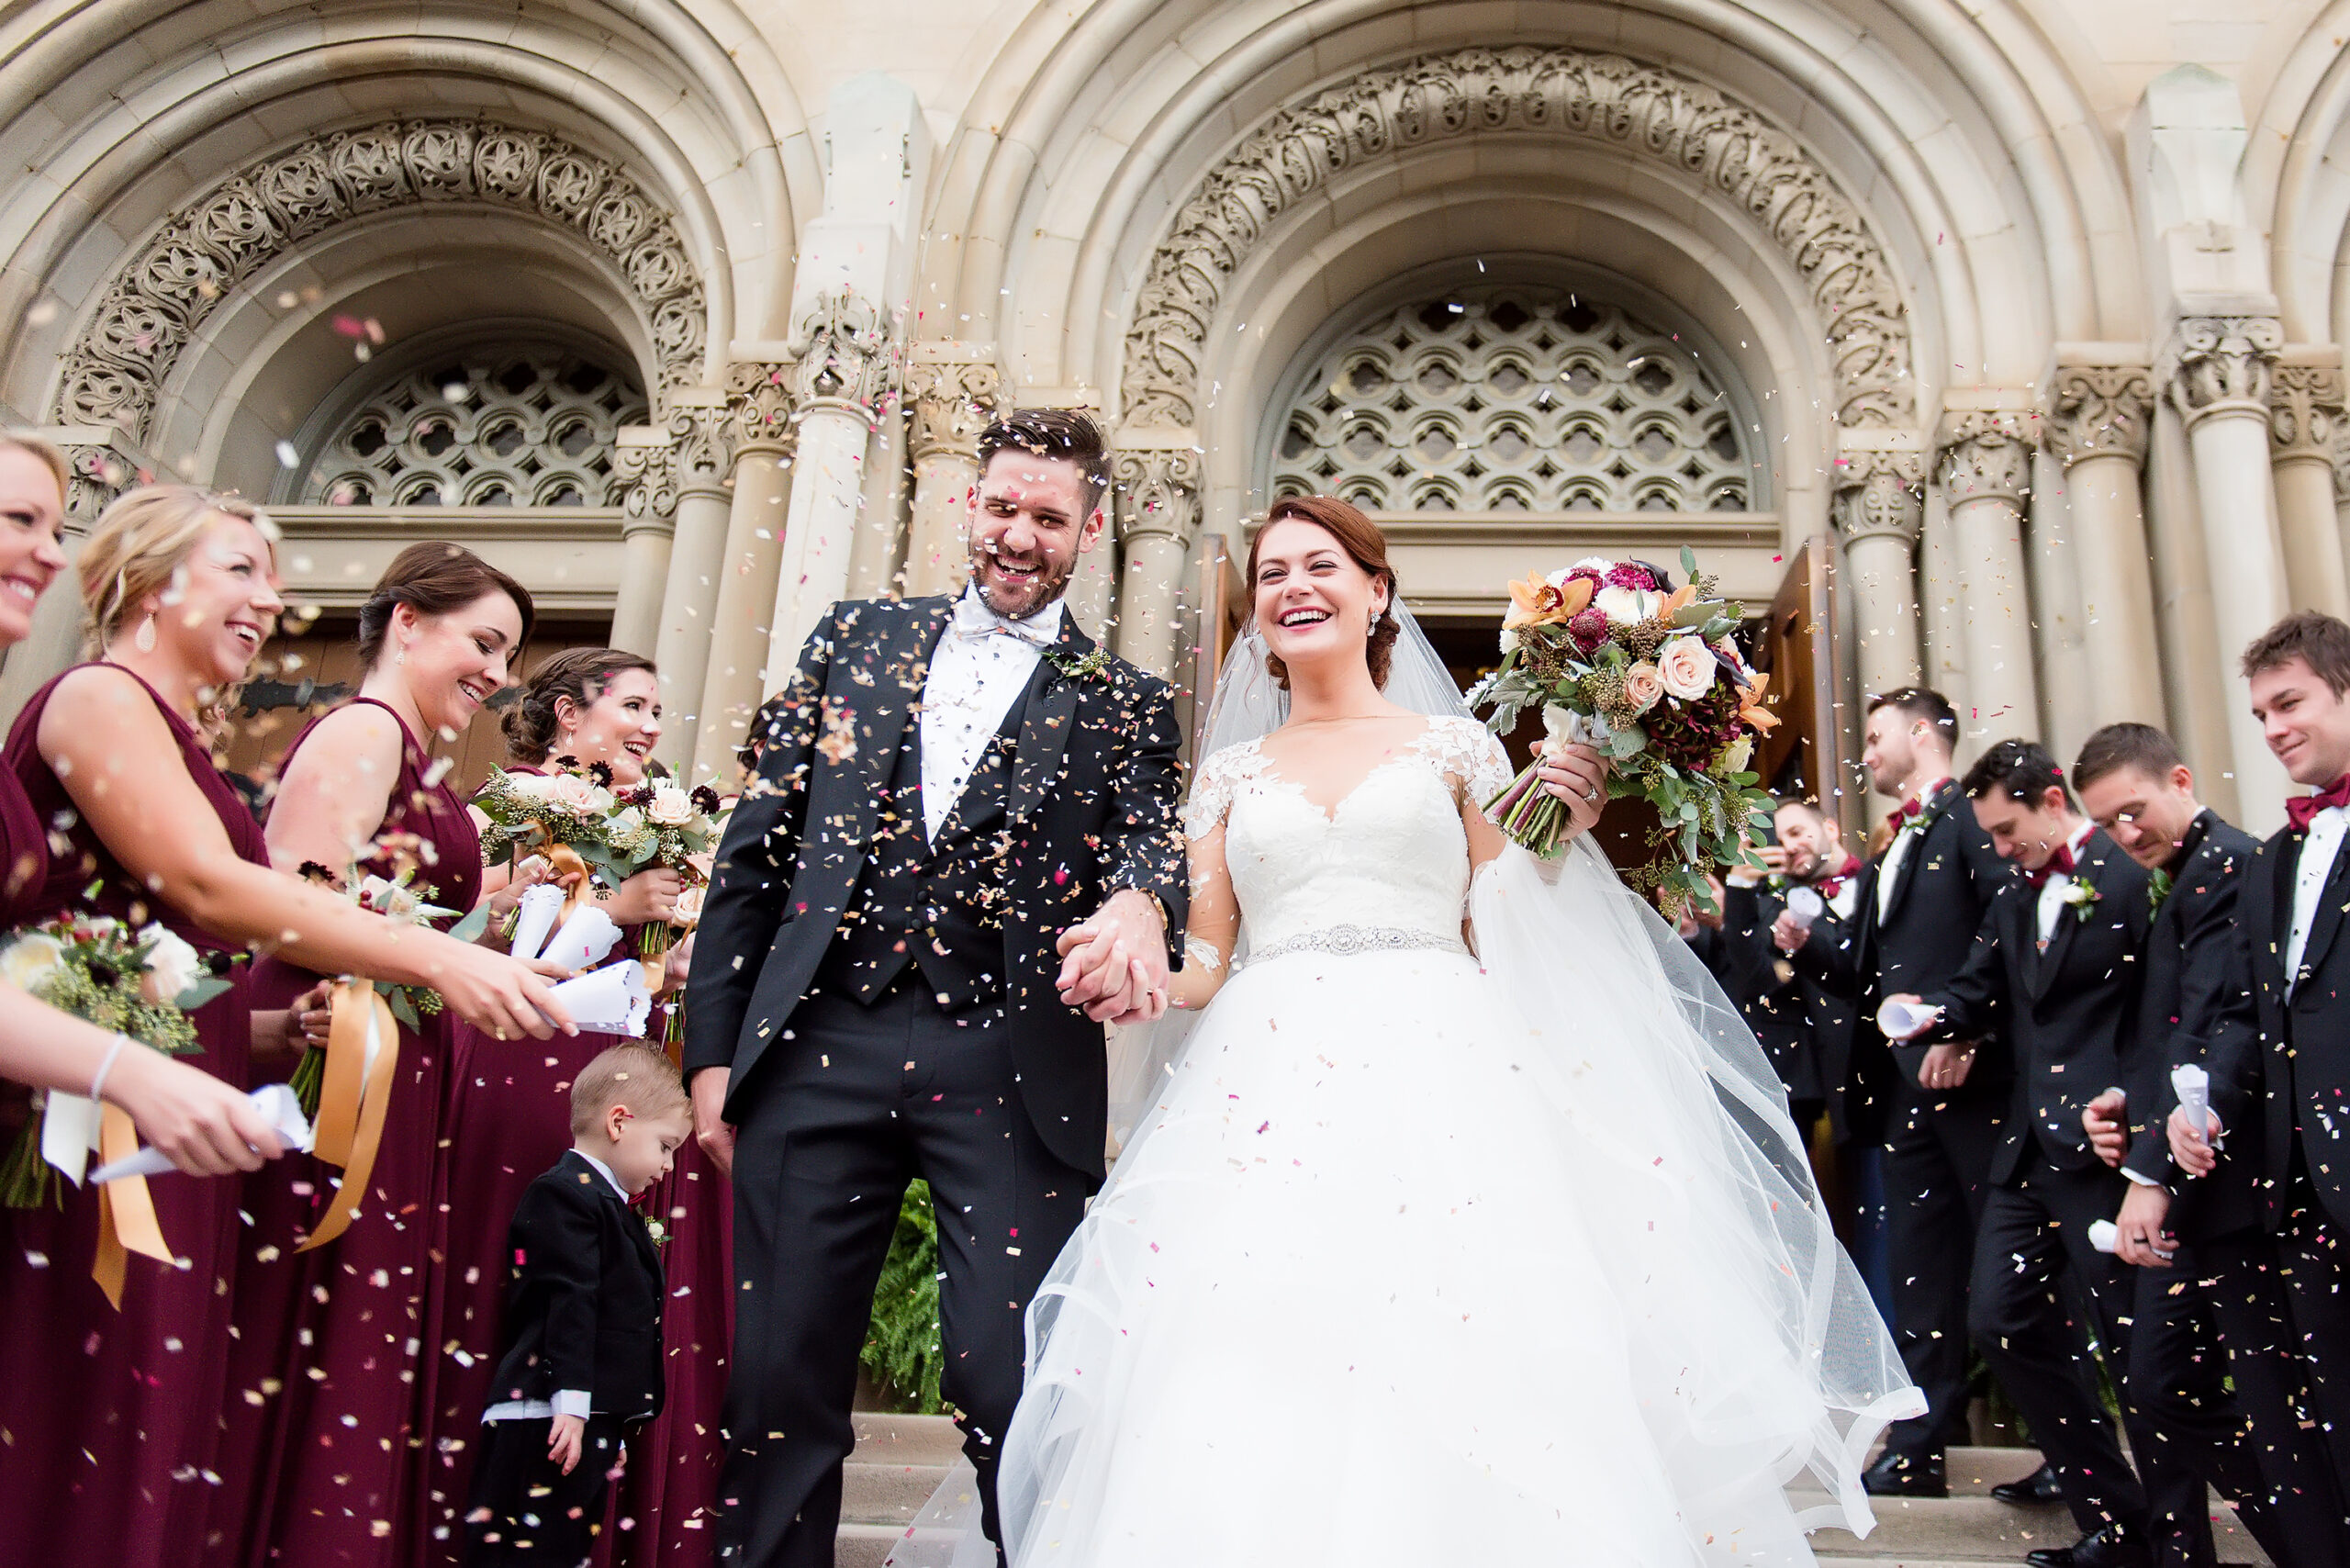 A photo of a bride and groom smiling and holding hands. Their wedding party threw rose petals into the air.